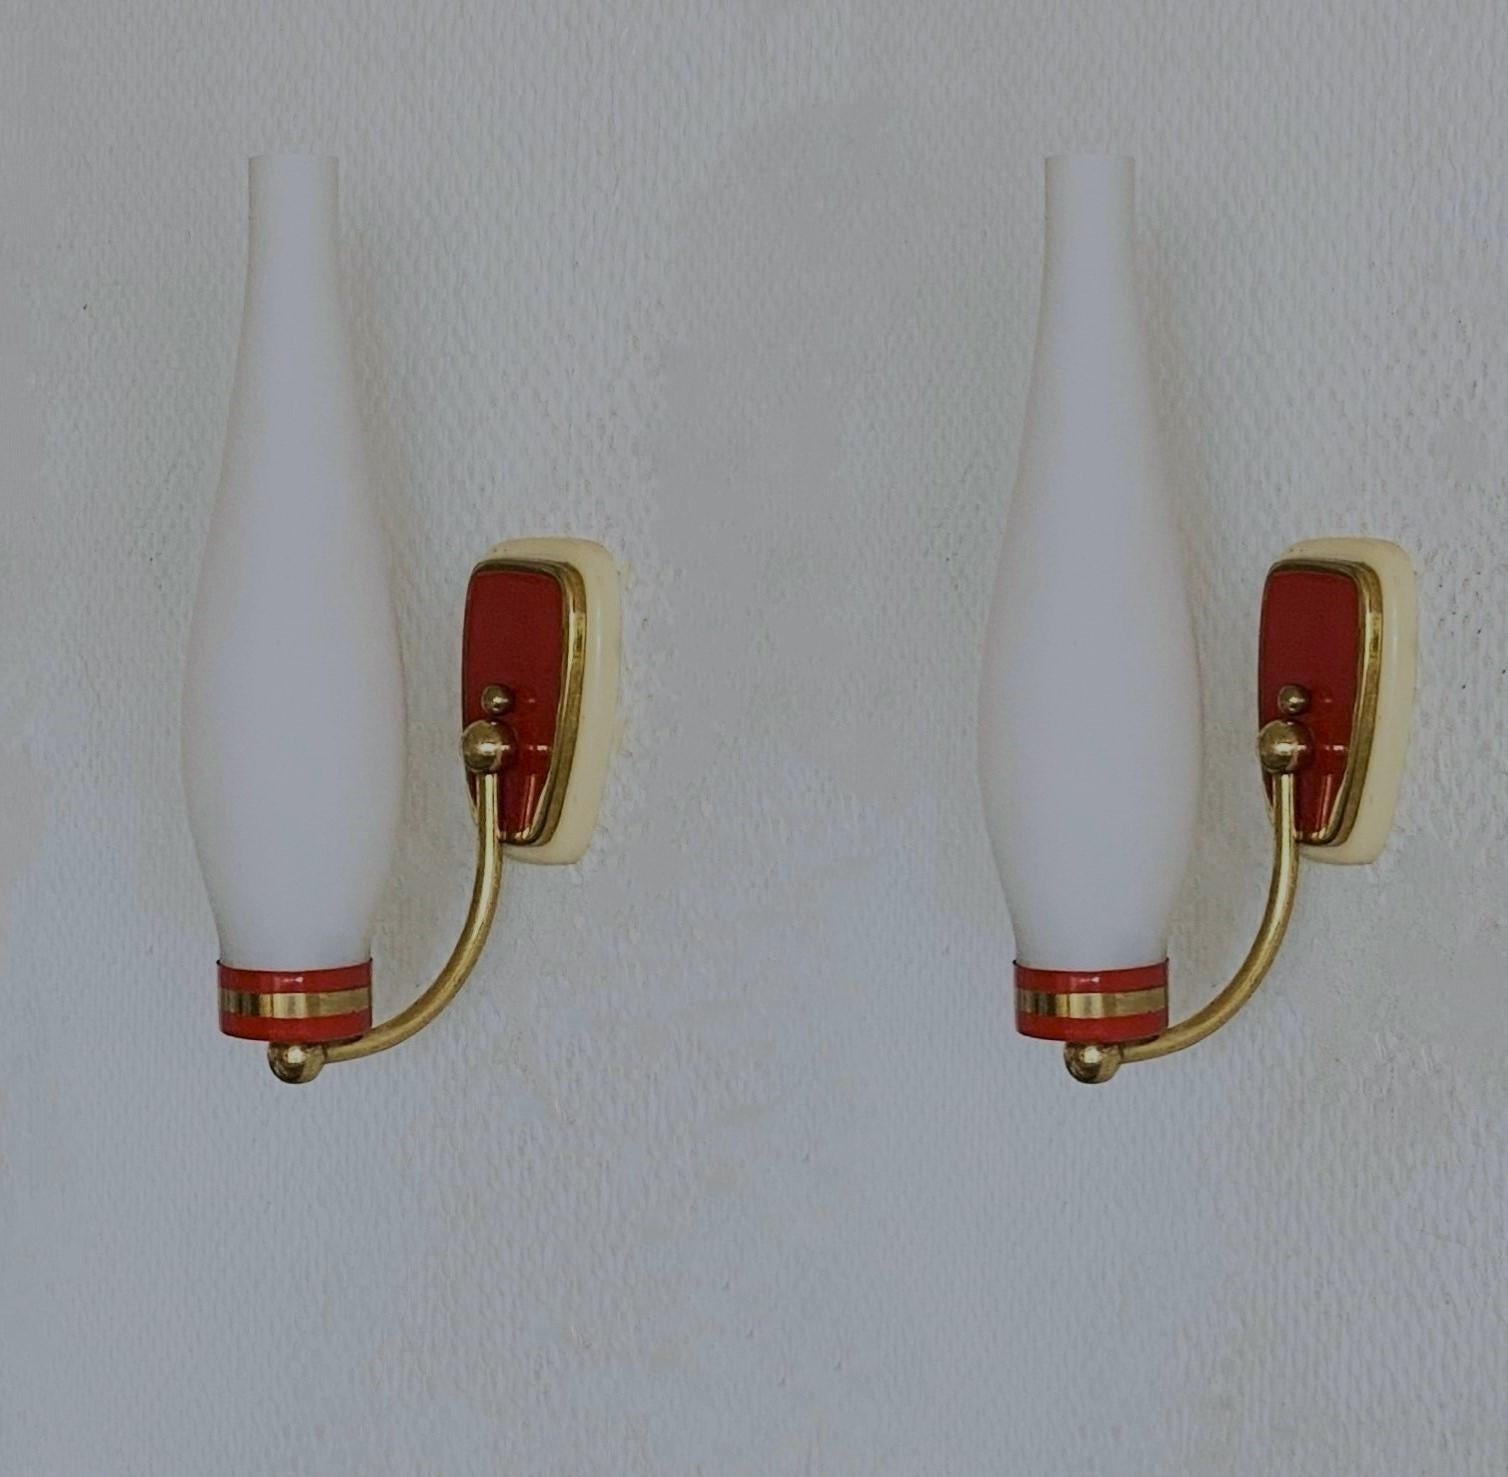 A lovely pair of wall sconces in Stilnovo style, Italy, 1960, modernist and clear lines design, brass galery with opal glass shades - the brass mounts are parcel red enameled. Both sconces in fine vintage condition, no damages, fully functional.